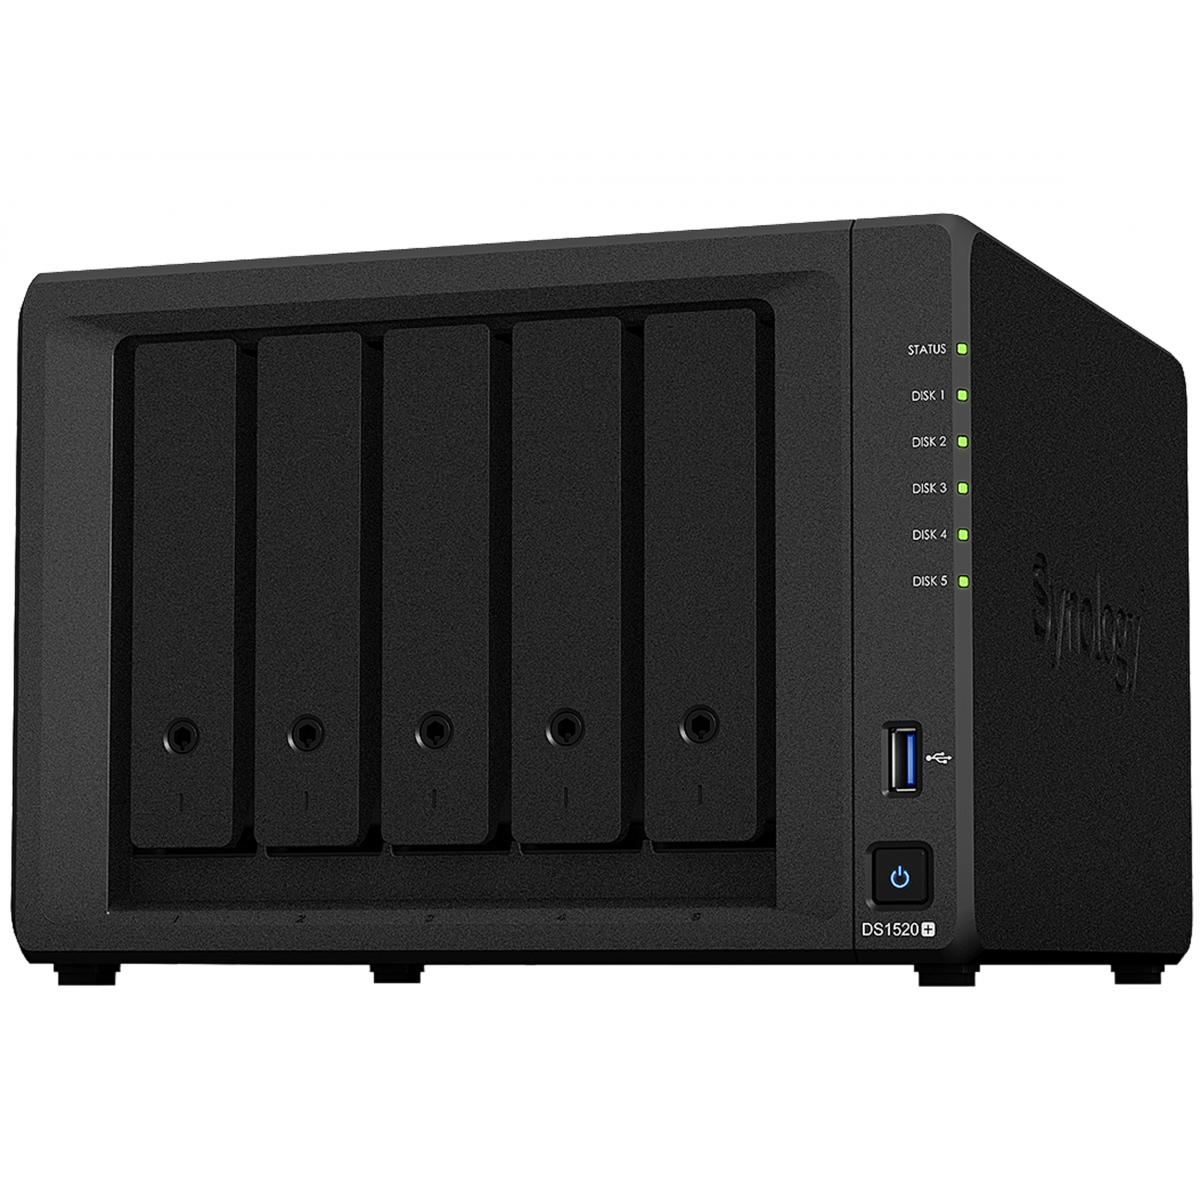 Synology DiskStation DS1520+ 5-Bay NAS Storage Enclosure Ideal Network-Attached Storage Solution w/ SSD Cache Acceleration Capability